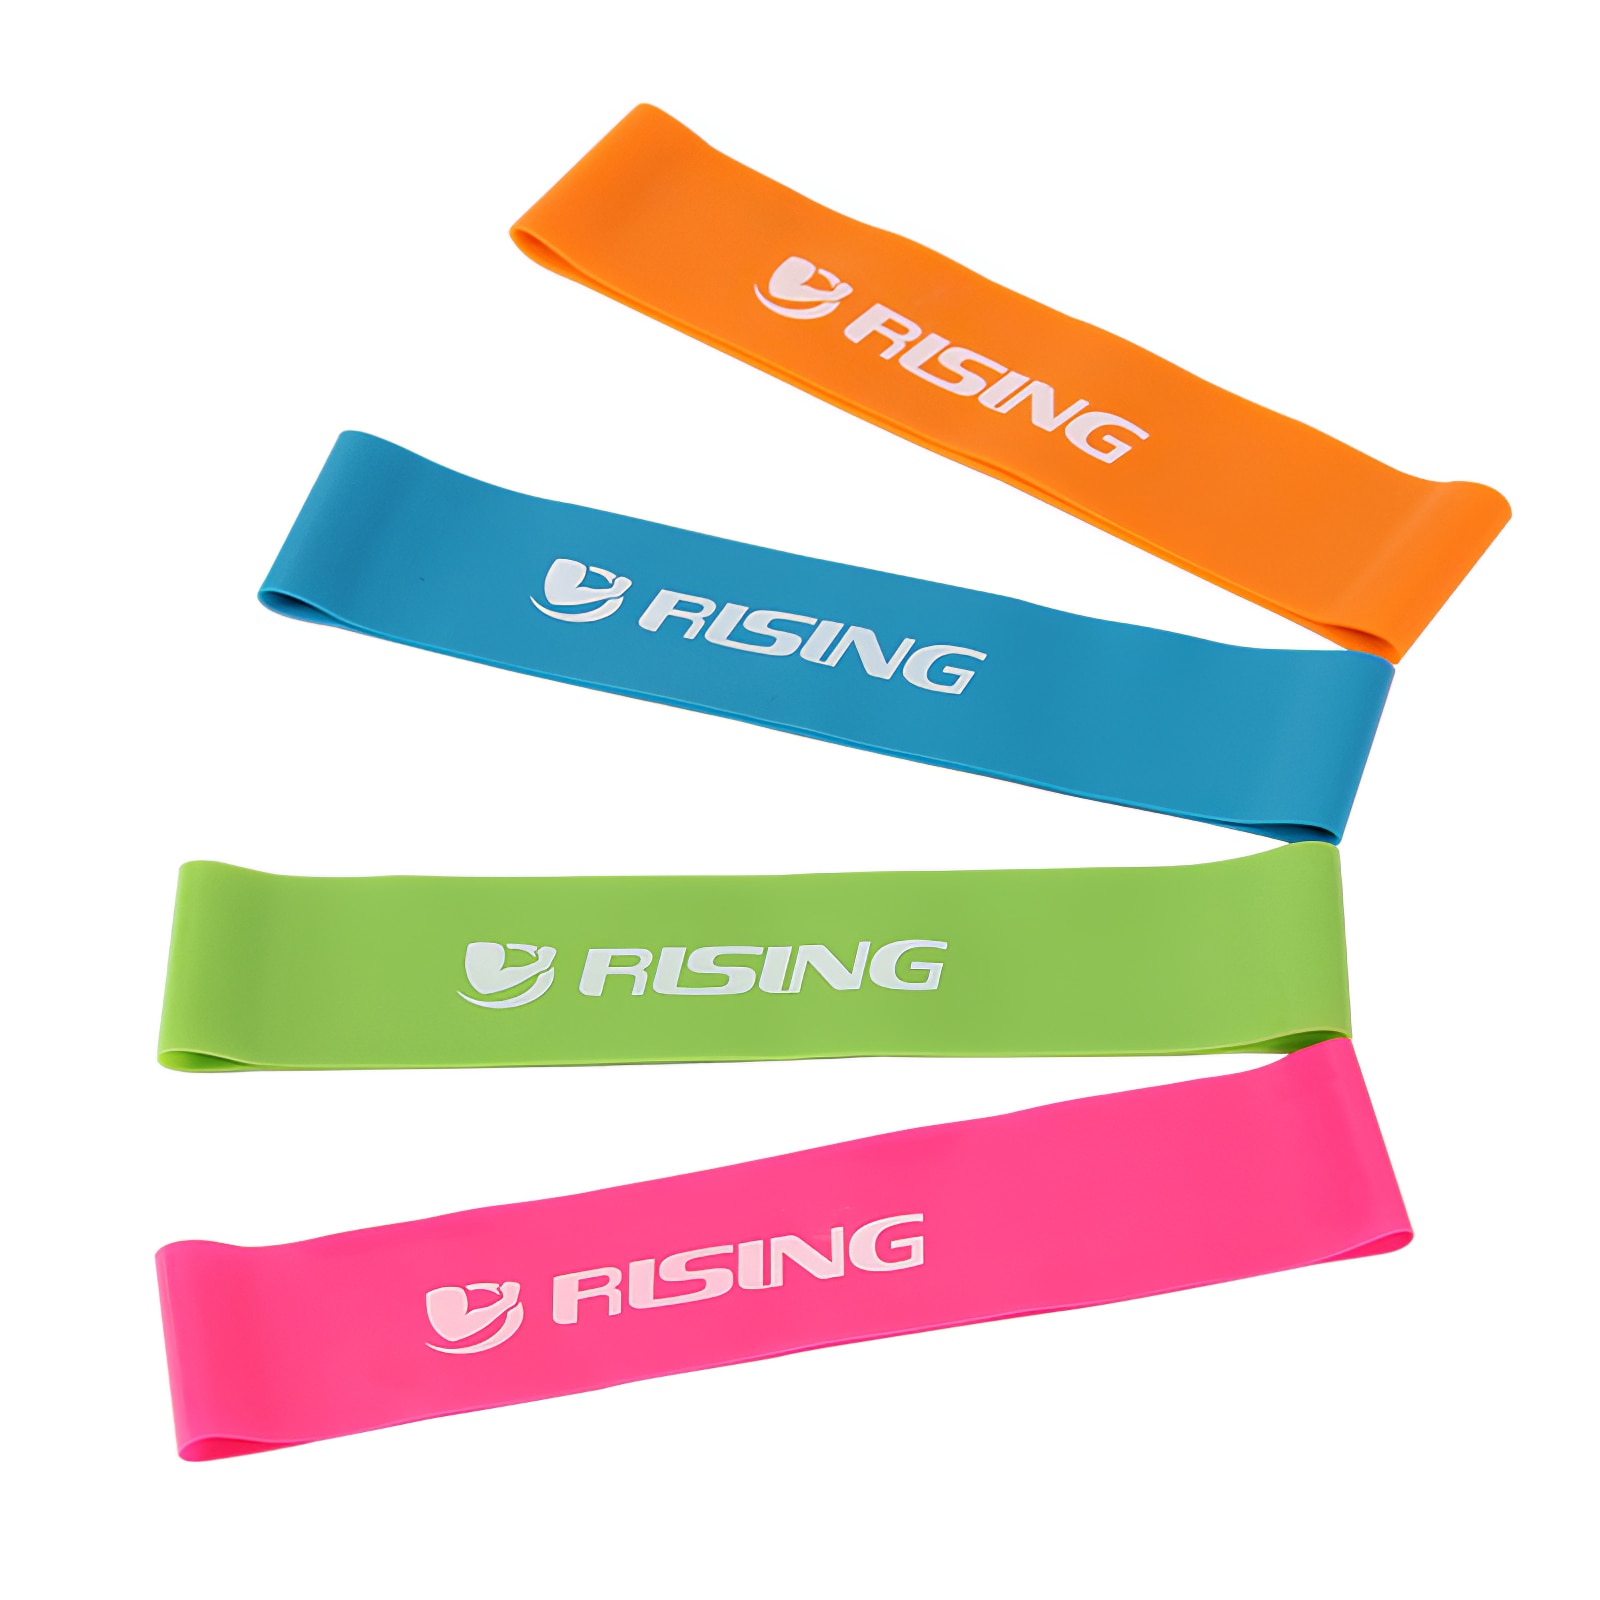 Yoga Resistance Bands Fitness Elastische Bands Training Fitness Gom Pilates Gym Sterkte Bands Sport Crossfit Workout Apparatuur